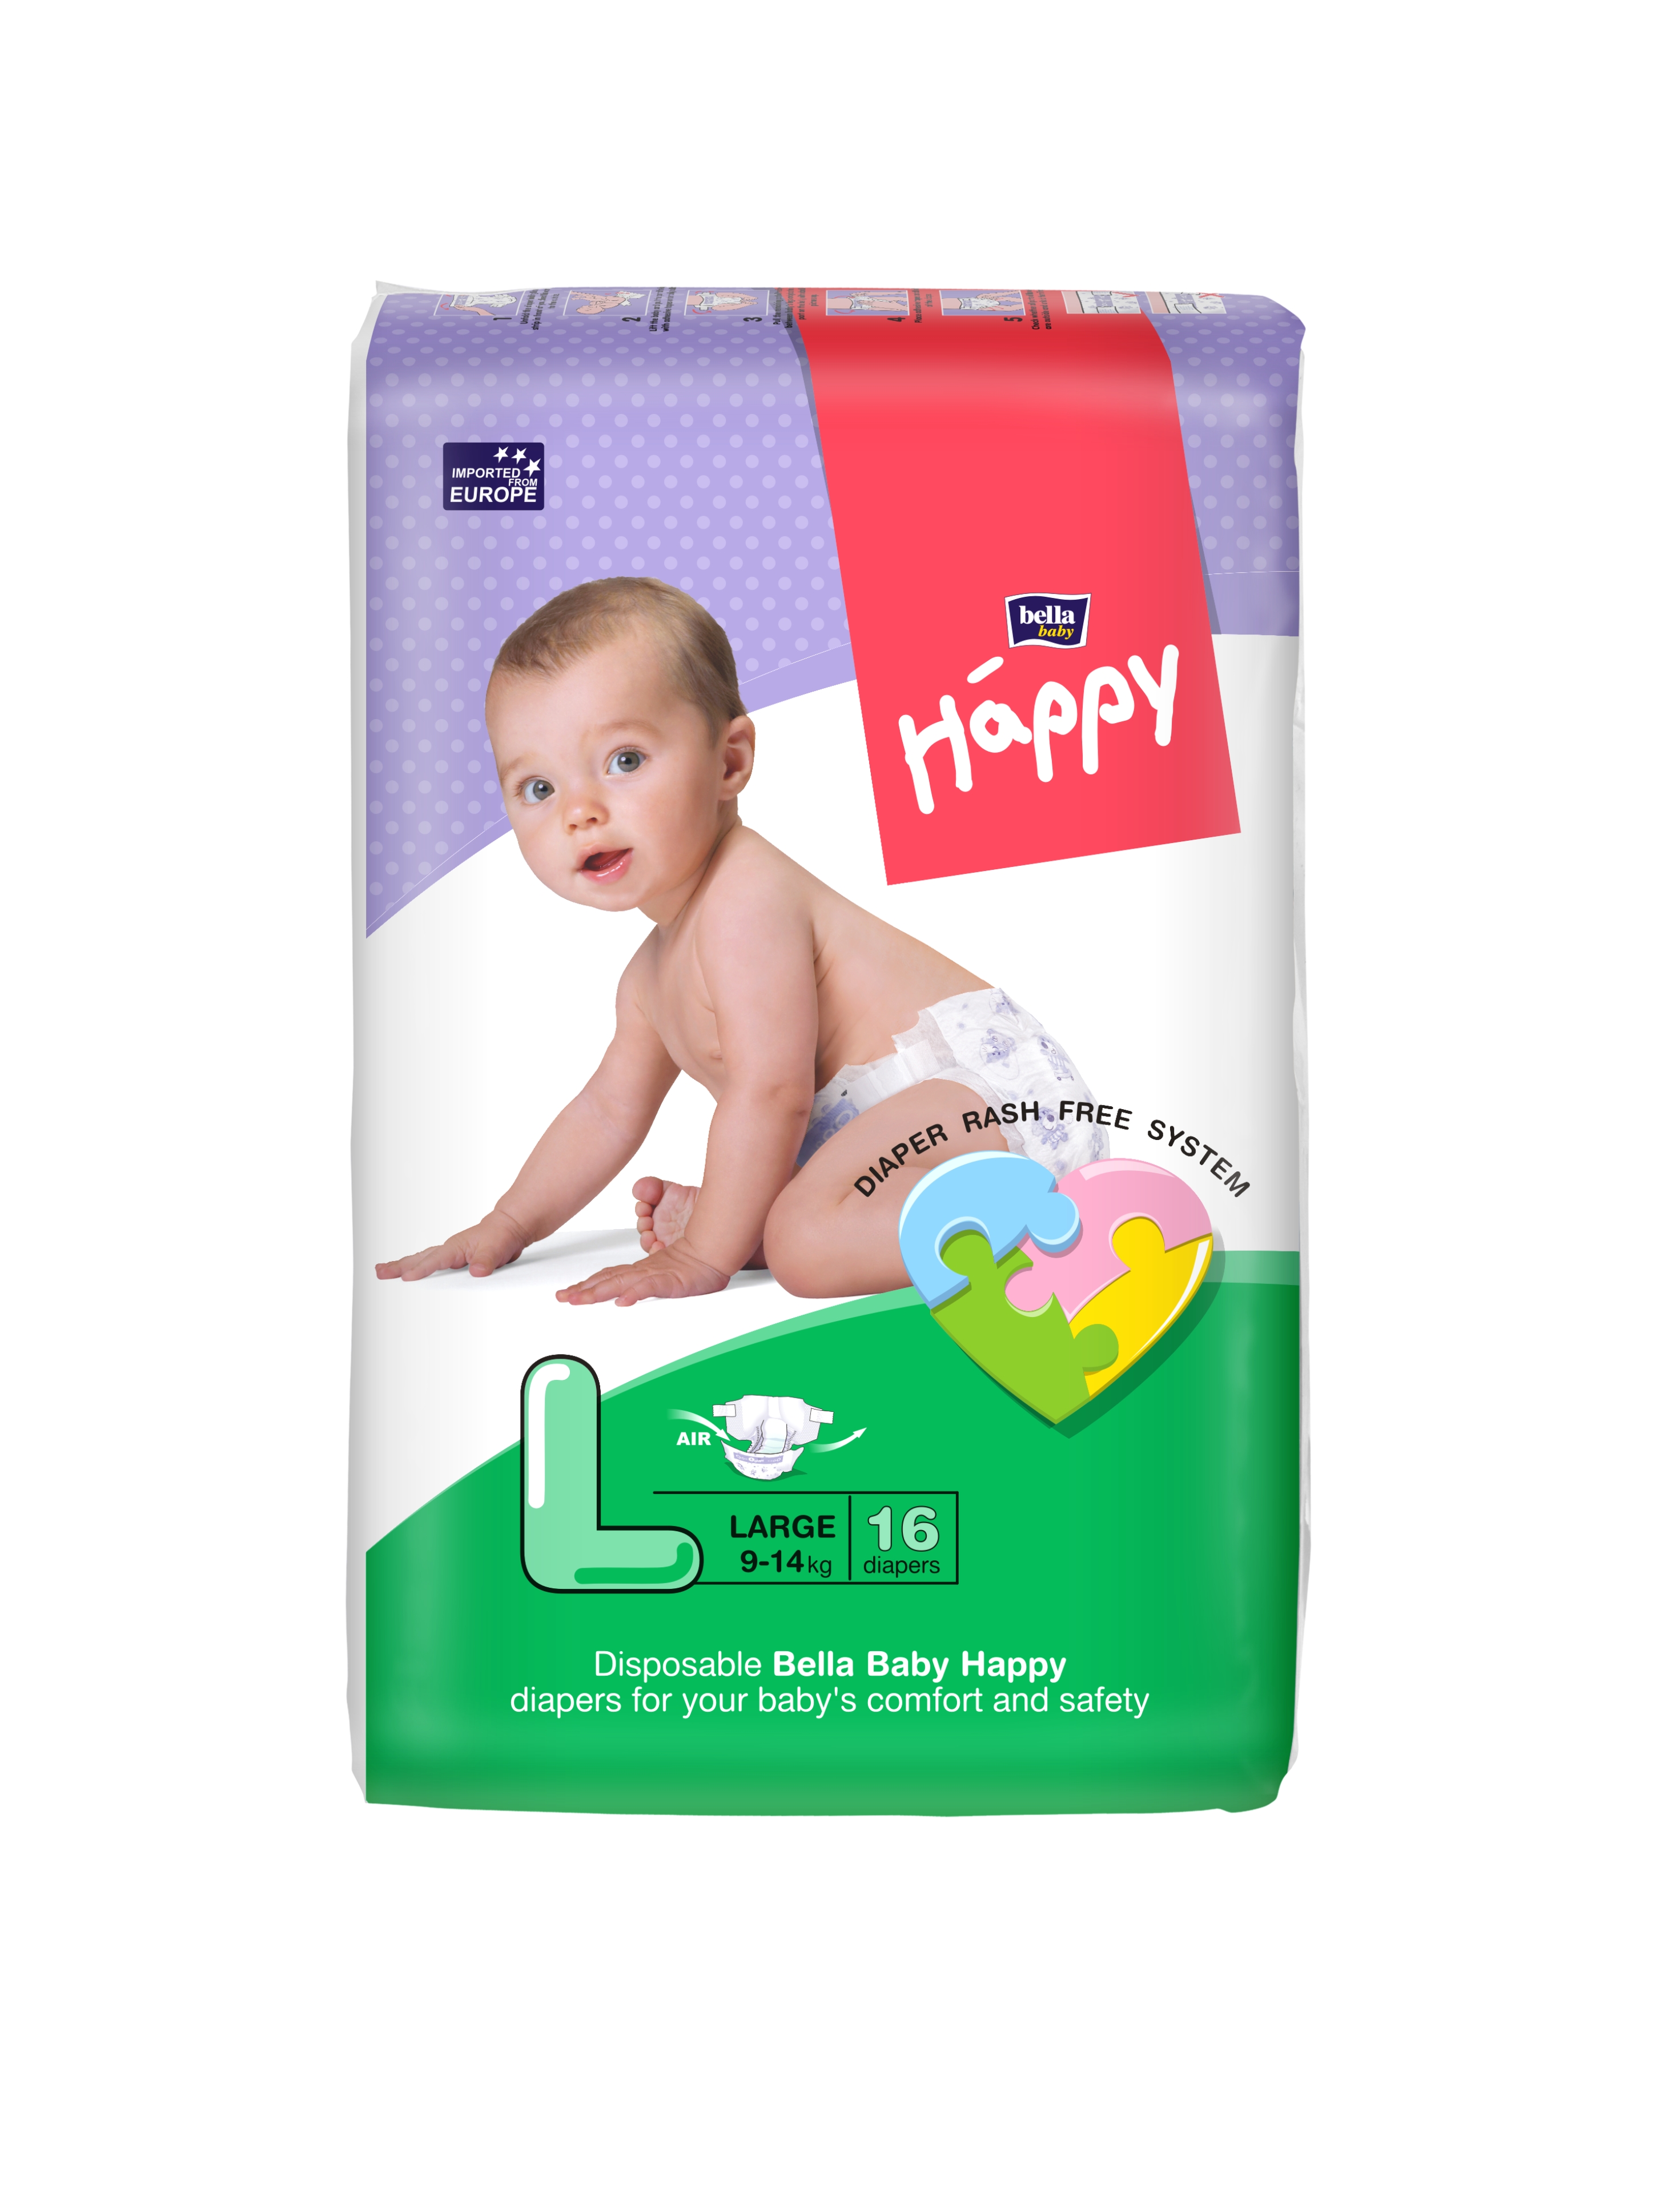 BELLA BABY HAPPY DIAPERS LARGE 16 PCS